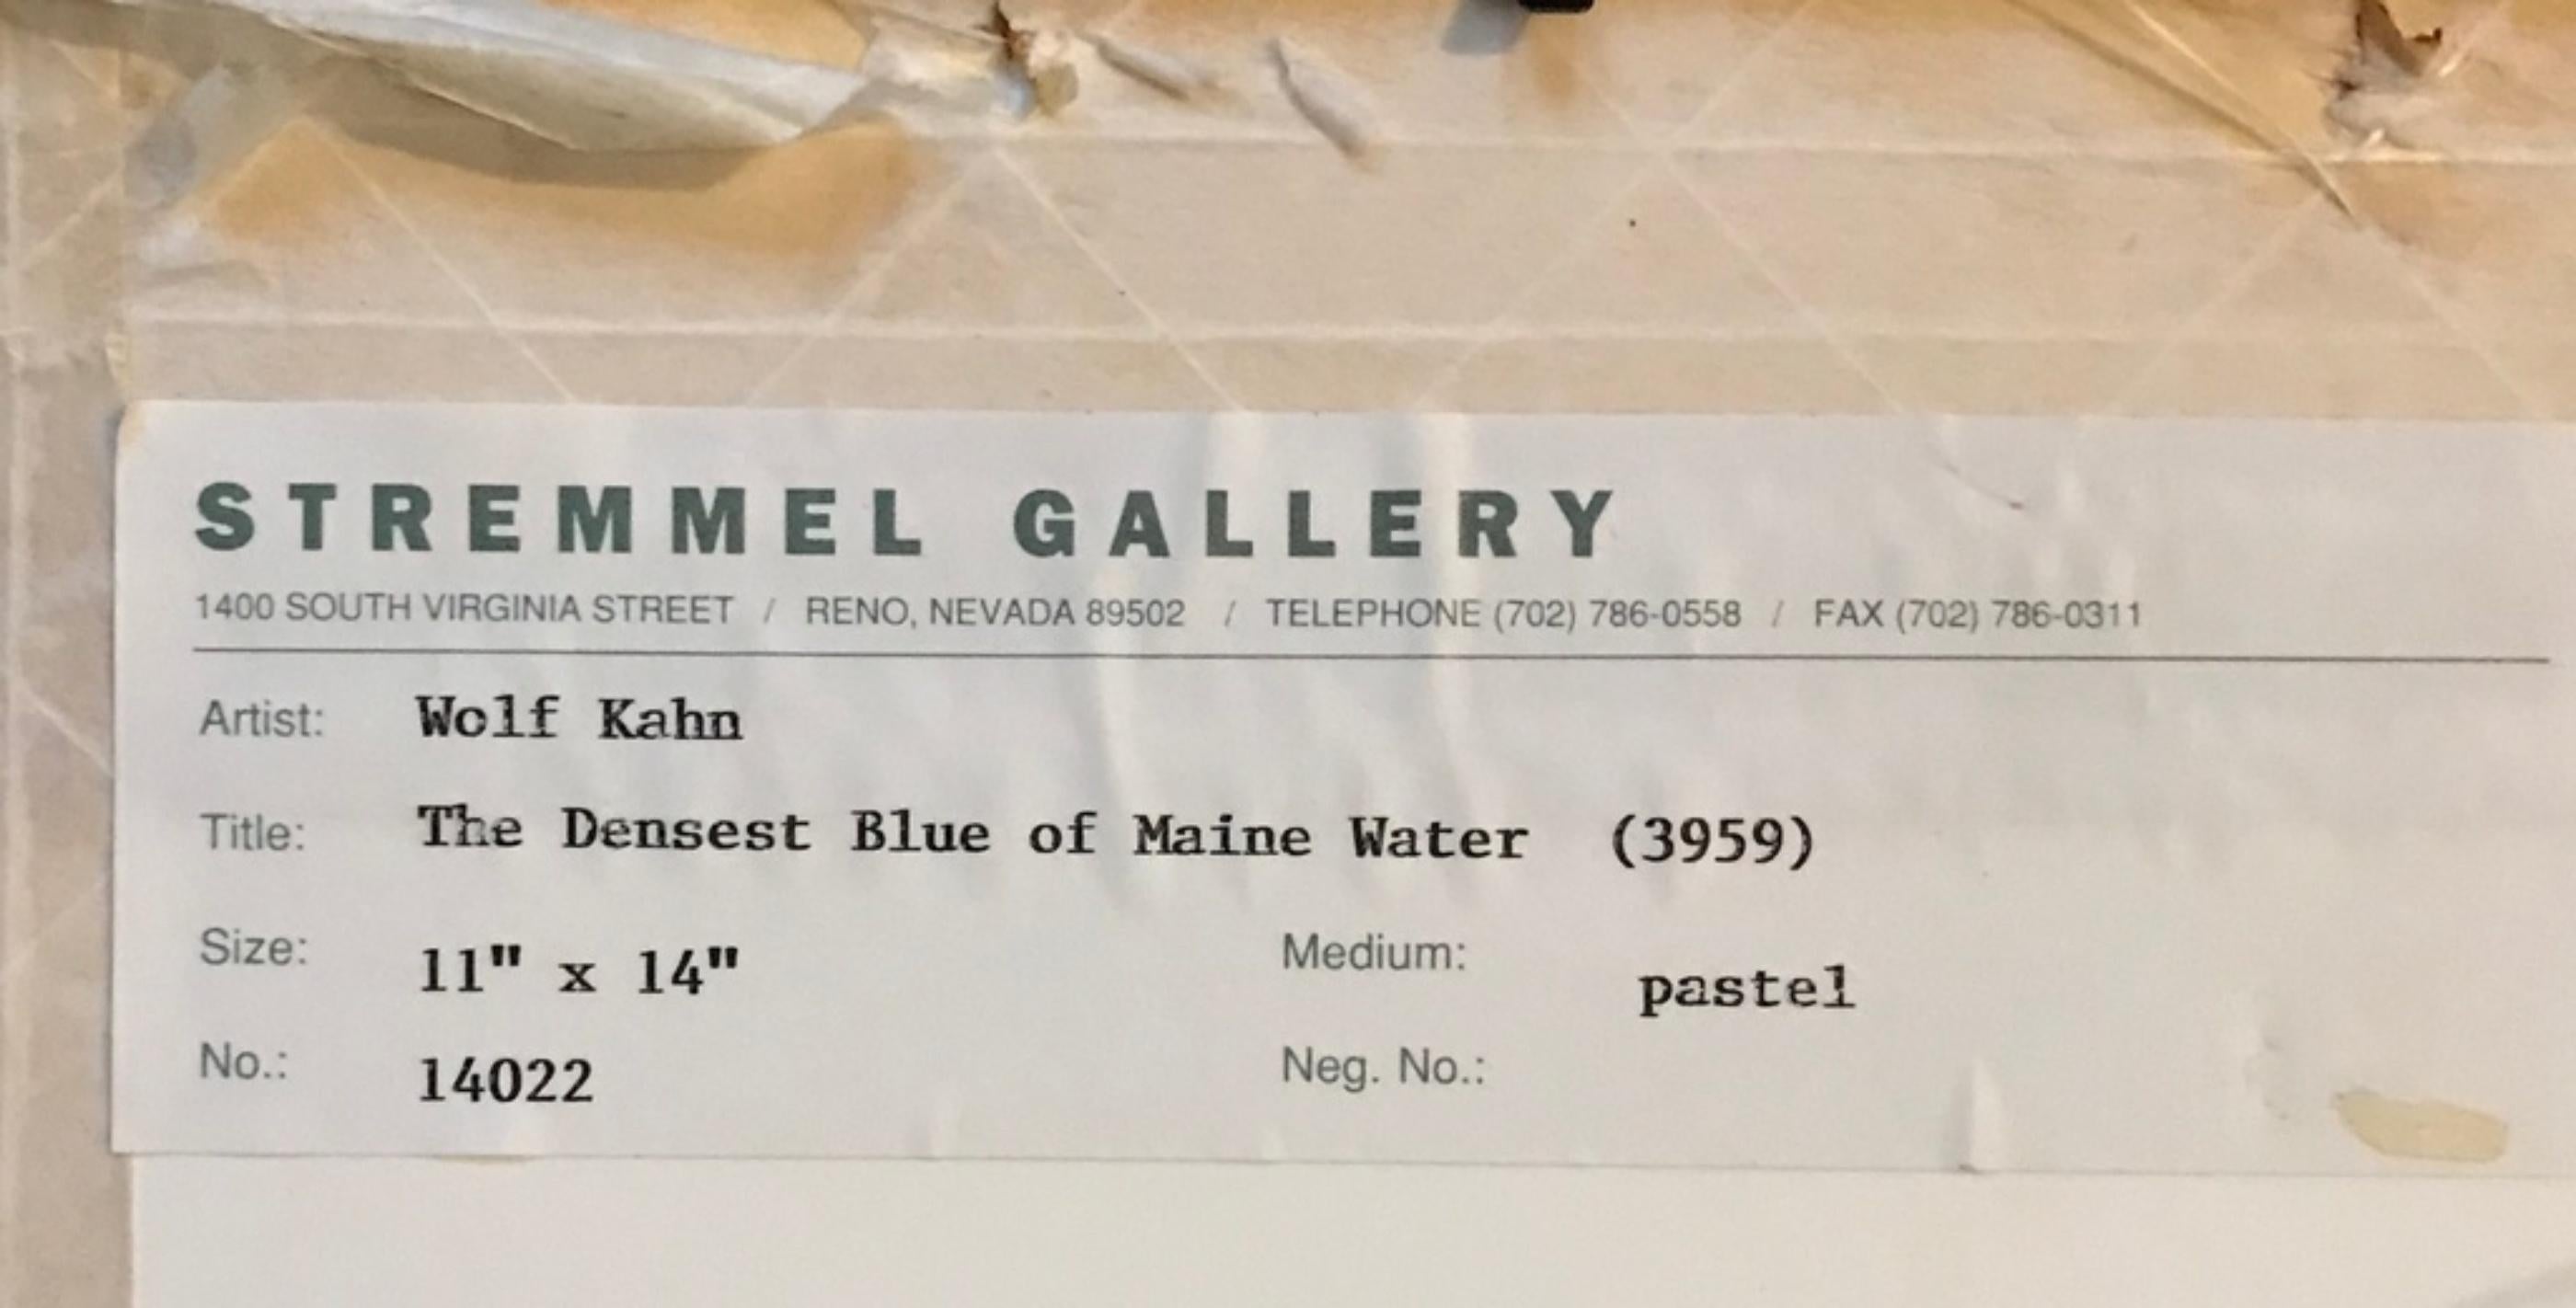 The Densest Blue of Maine Water (de-accessioned from the Nevada Art Museum) - Gray Landscape Art by Wolf Kahn